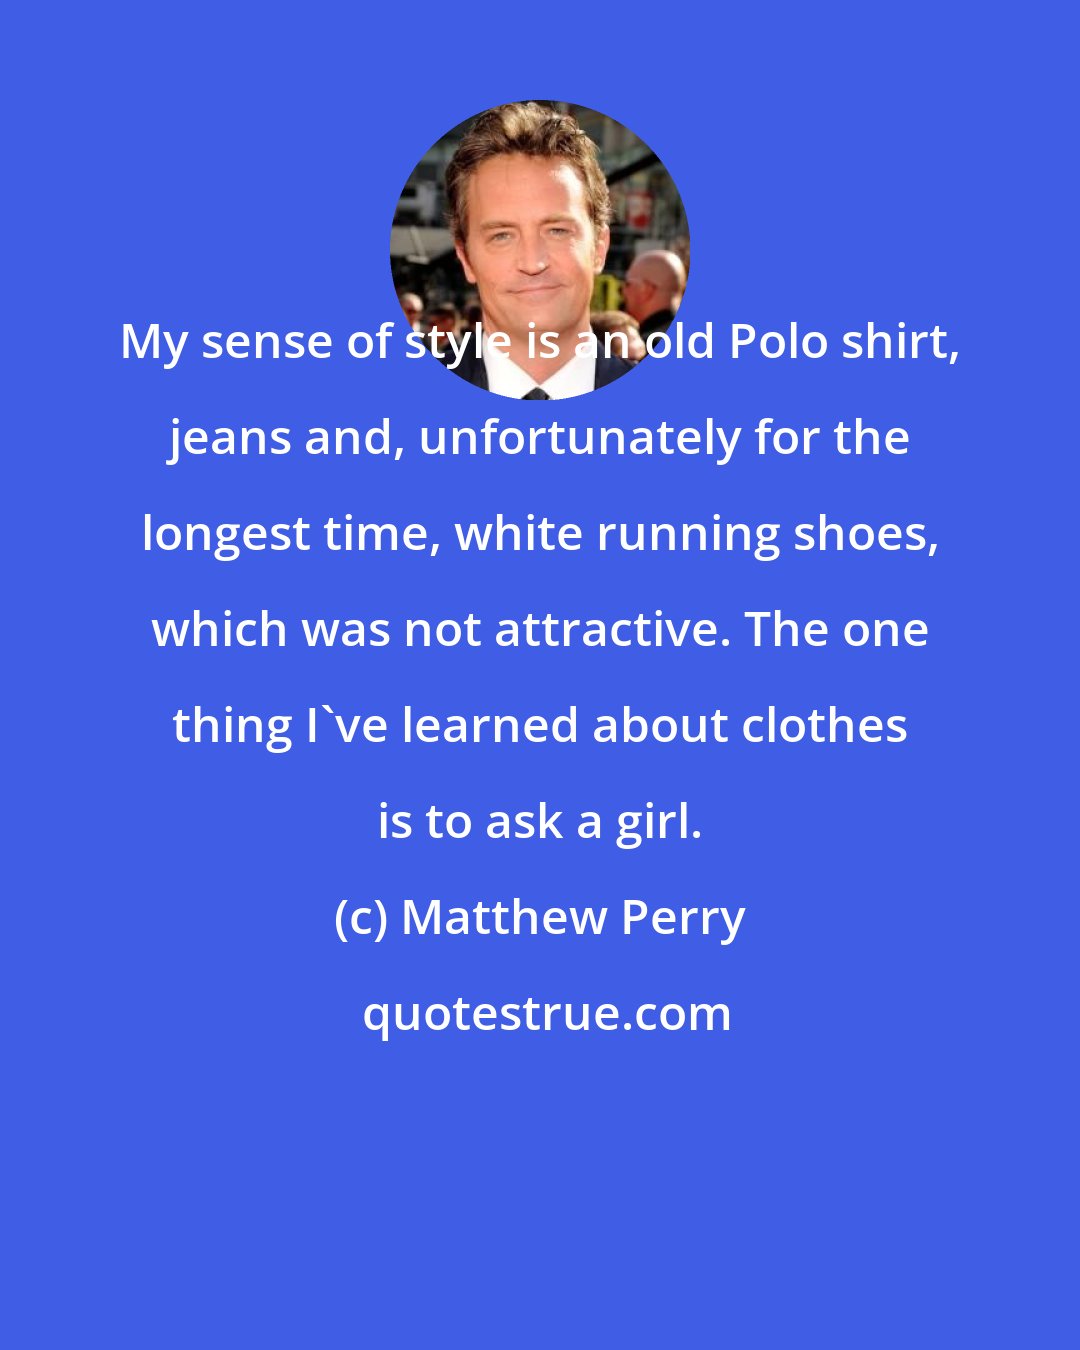 Matthew Perry: My sense of style is an old Polo shirt, jeans and, unfortunately for the longest time, white running shoes, which was not attractive. The one thing I've learned about clothes is to ask a girl.